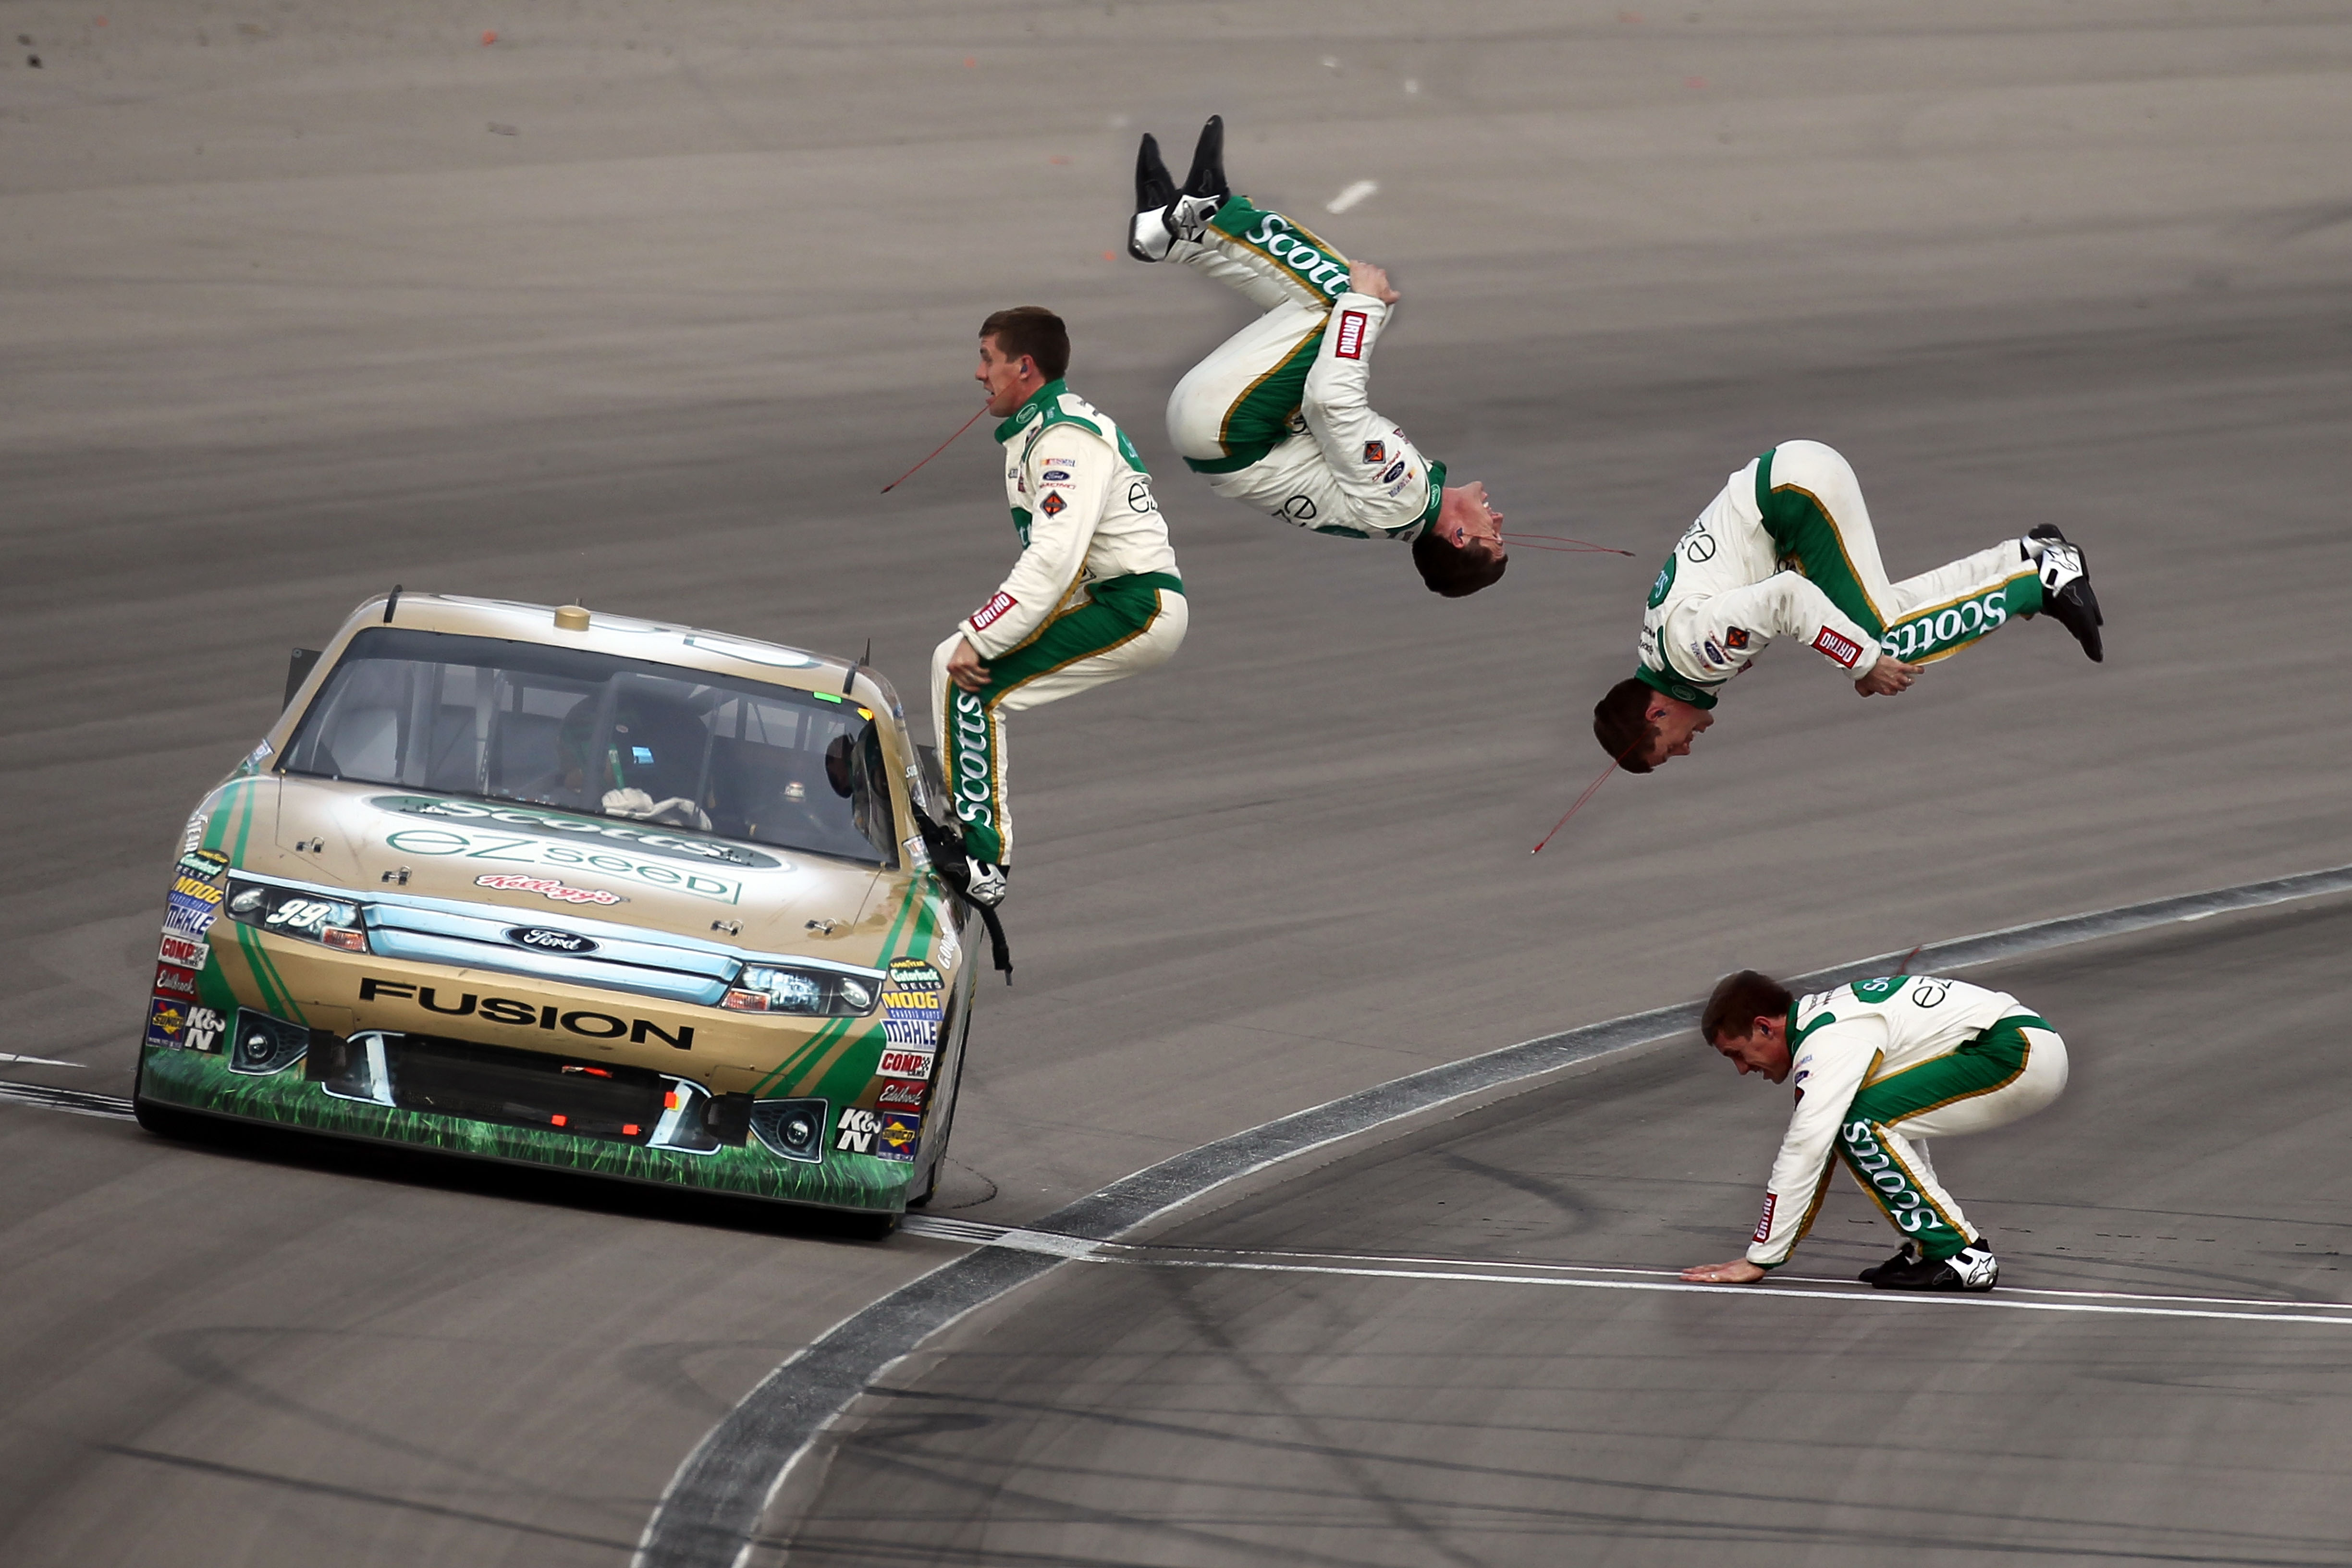 LAS VEGAS, NV - MARCH 06:  (***EDITOR'S NOTE*** COMPOSITE PHOTO ILLUSTRATION CREATED USING MULTIPLE IMAGES) Carl Edwards, driver of the #99 Scotts/Kellogg's Ford, celebrates with a flip from his car after winning the NASCAR Sprint Cup Series Kobalt Tools